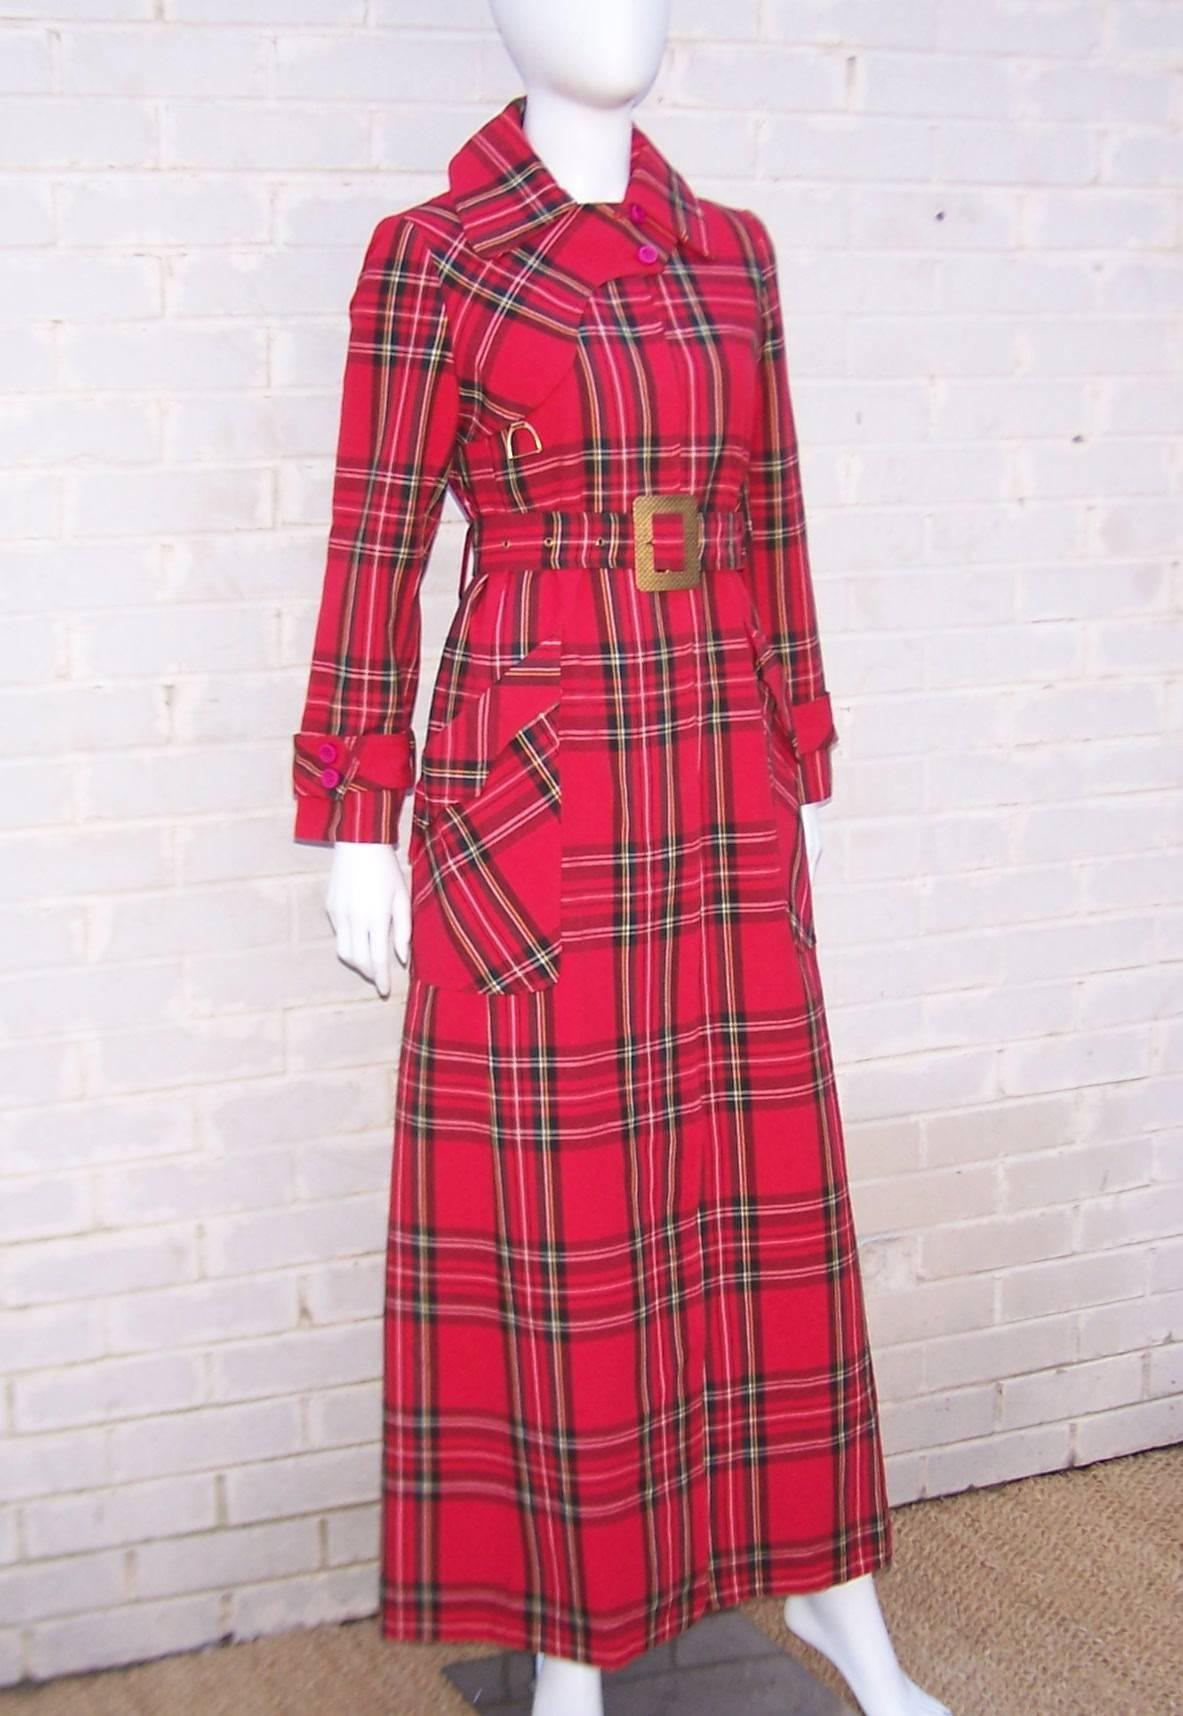 A little bit of punk and a little bit of prep wrapped up into a whole lotta coat!  This adorable red tartan plaid maxi coat by Fairbrooke has the classic details of a trench including an all season canvas weight.  The tall and slim design pairs well